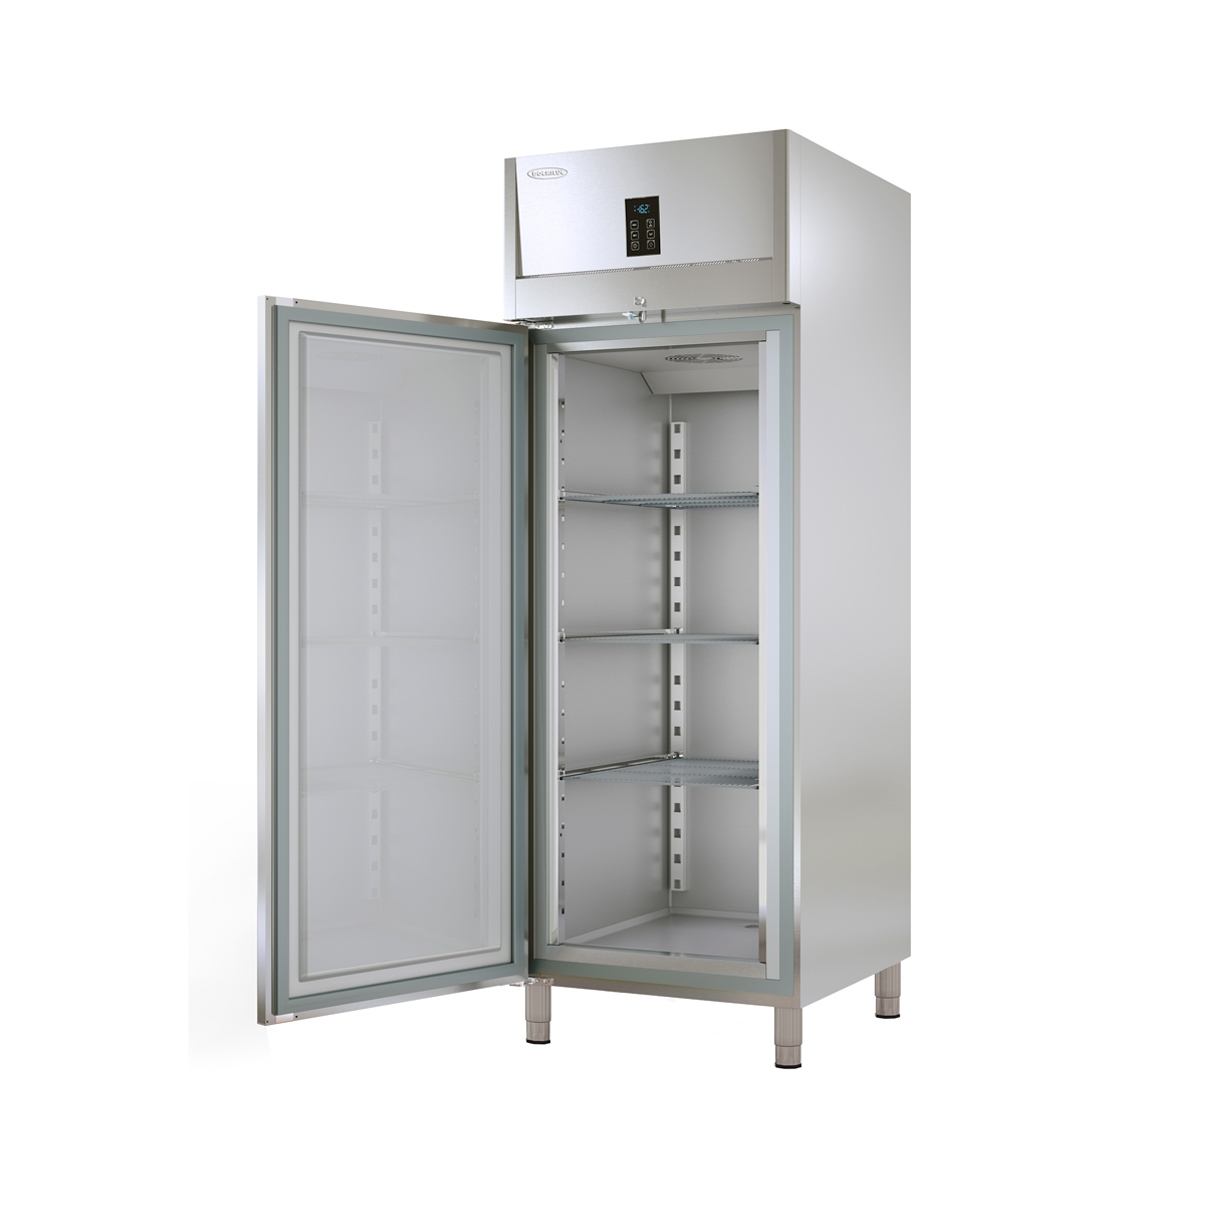 Gastronorm 2/1 High Efficiency Refrigerated Cabinet DHEGR-75-1